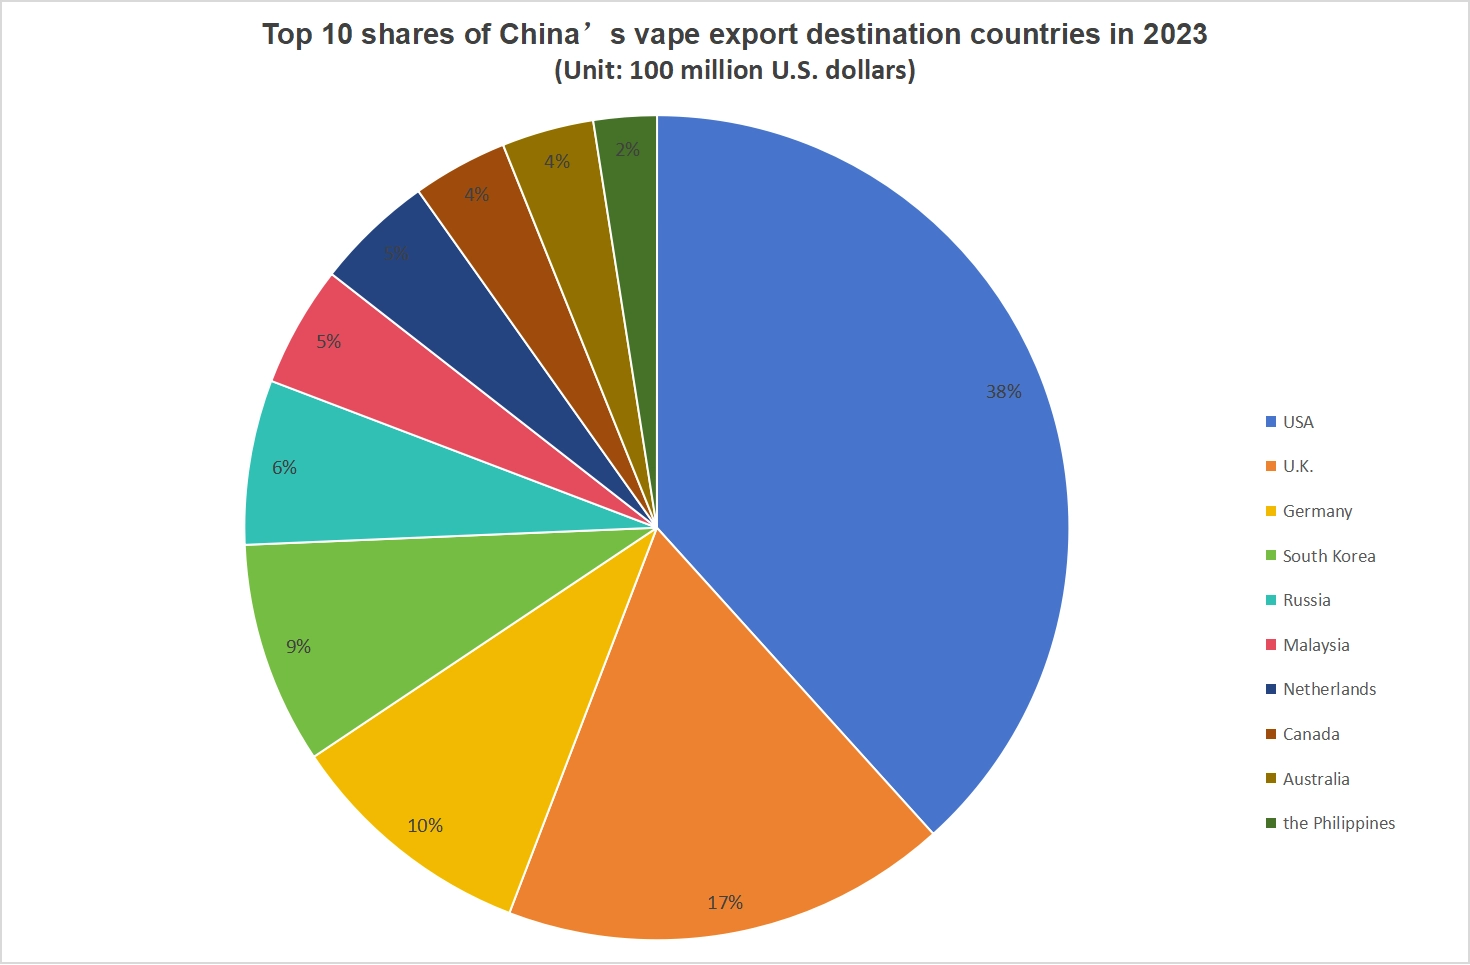 Top 10 shares of Chinas vape export destination countries in 2023